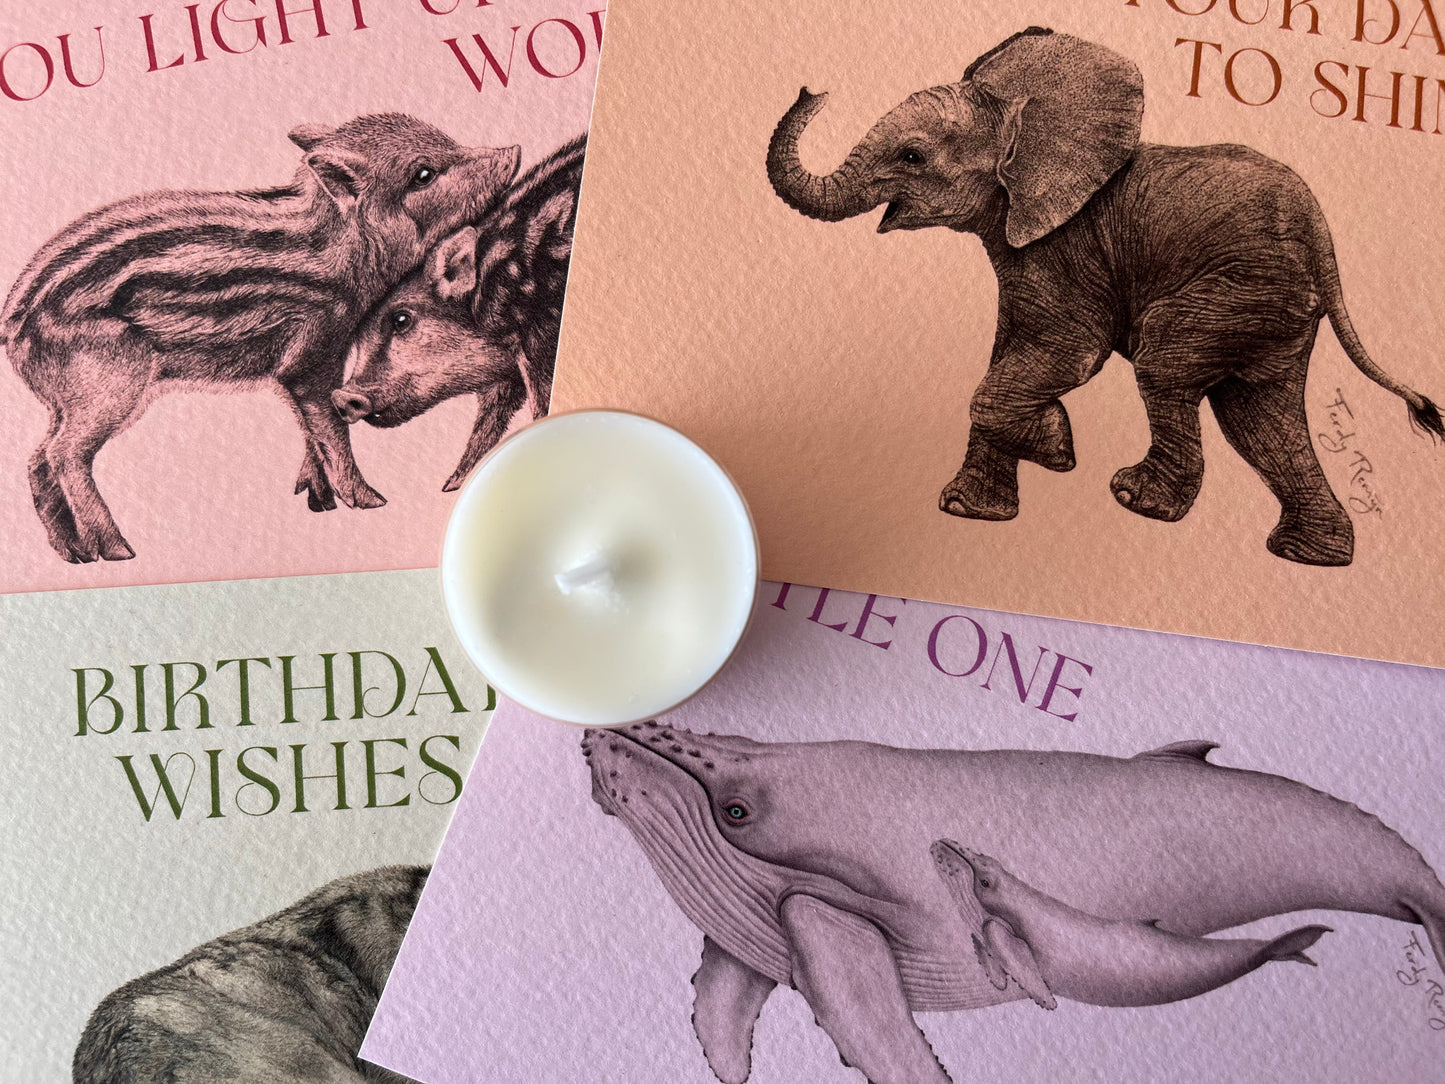 Tealight greeting card - Welcome little one